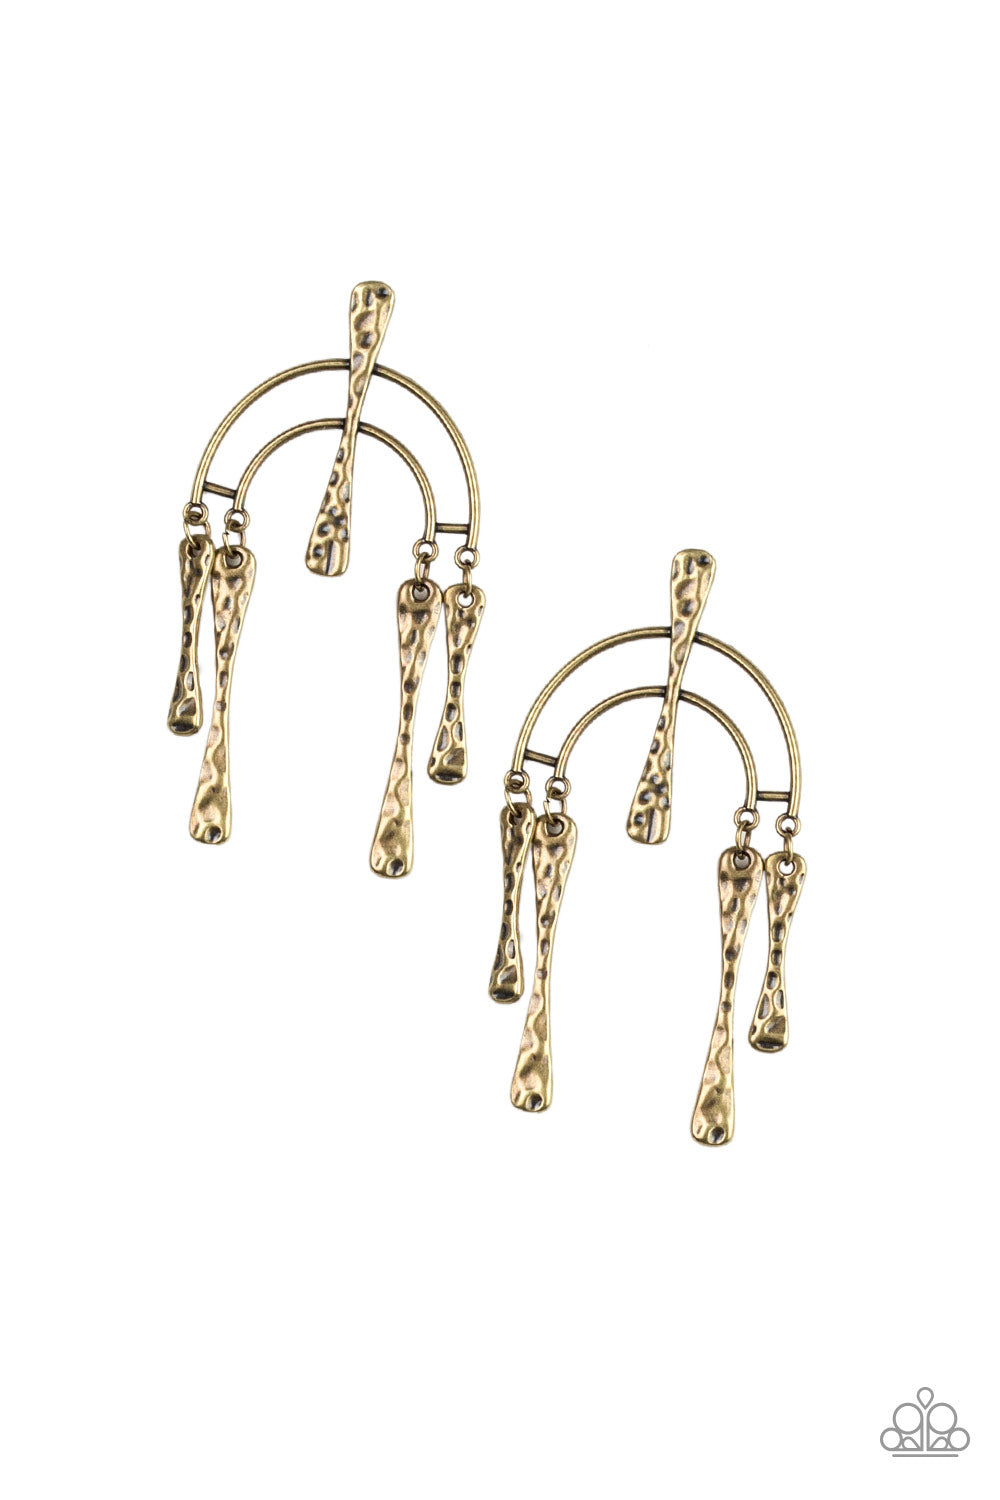 ARTIFACTS OF LIFE - BRASS POST EARRING